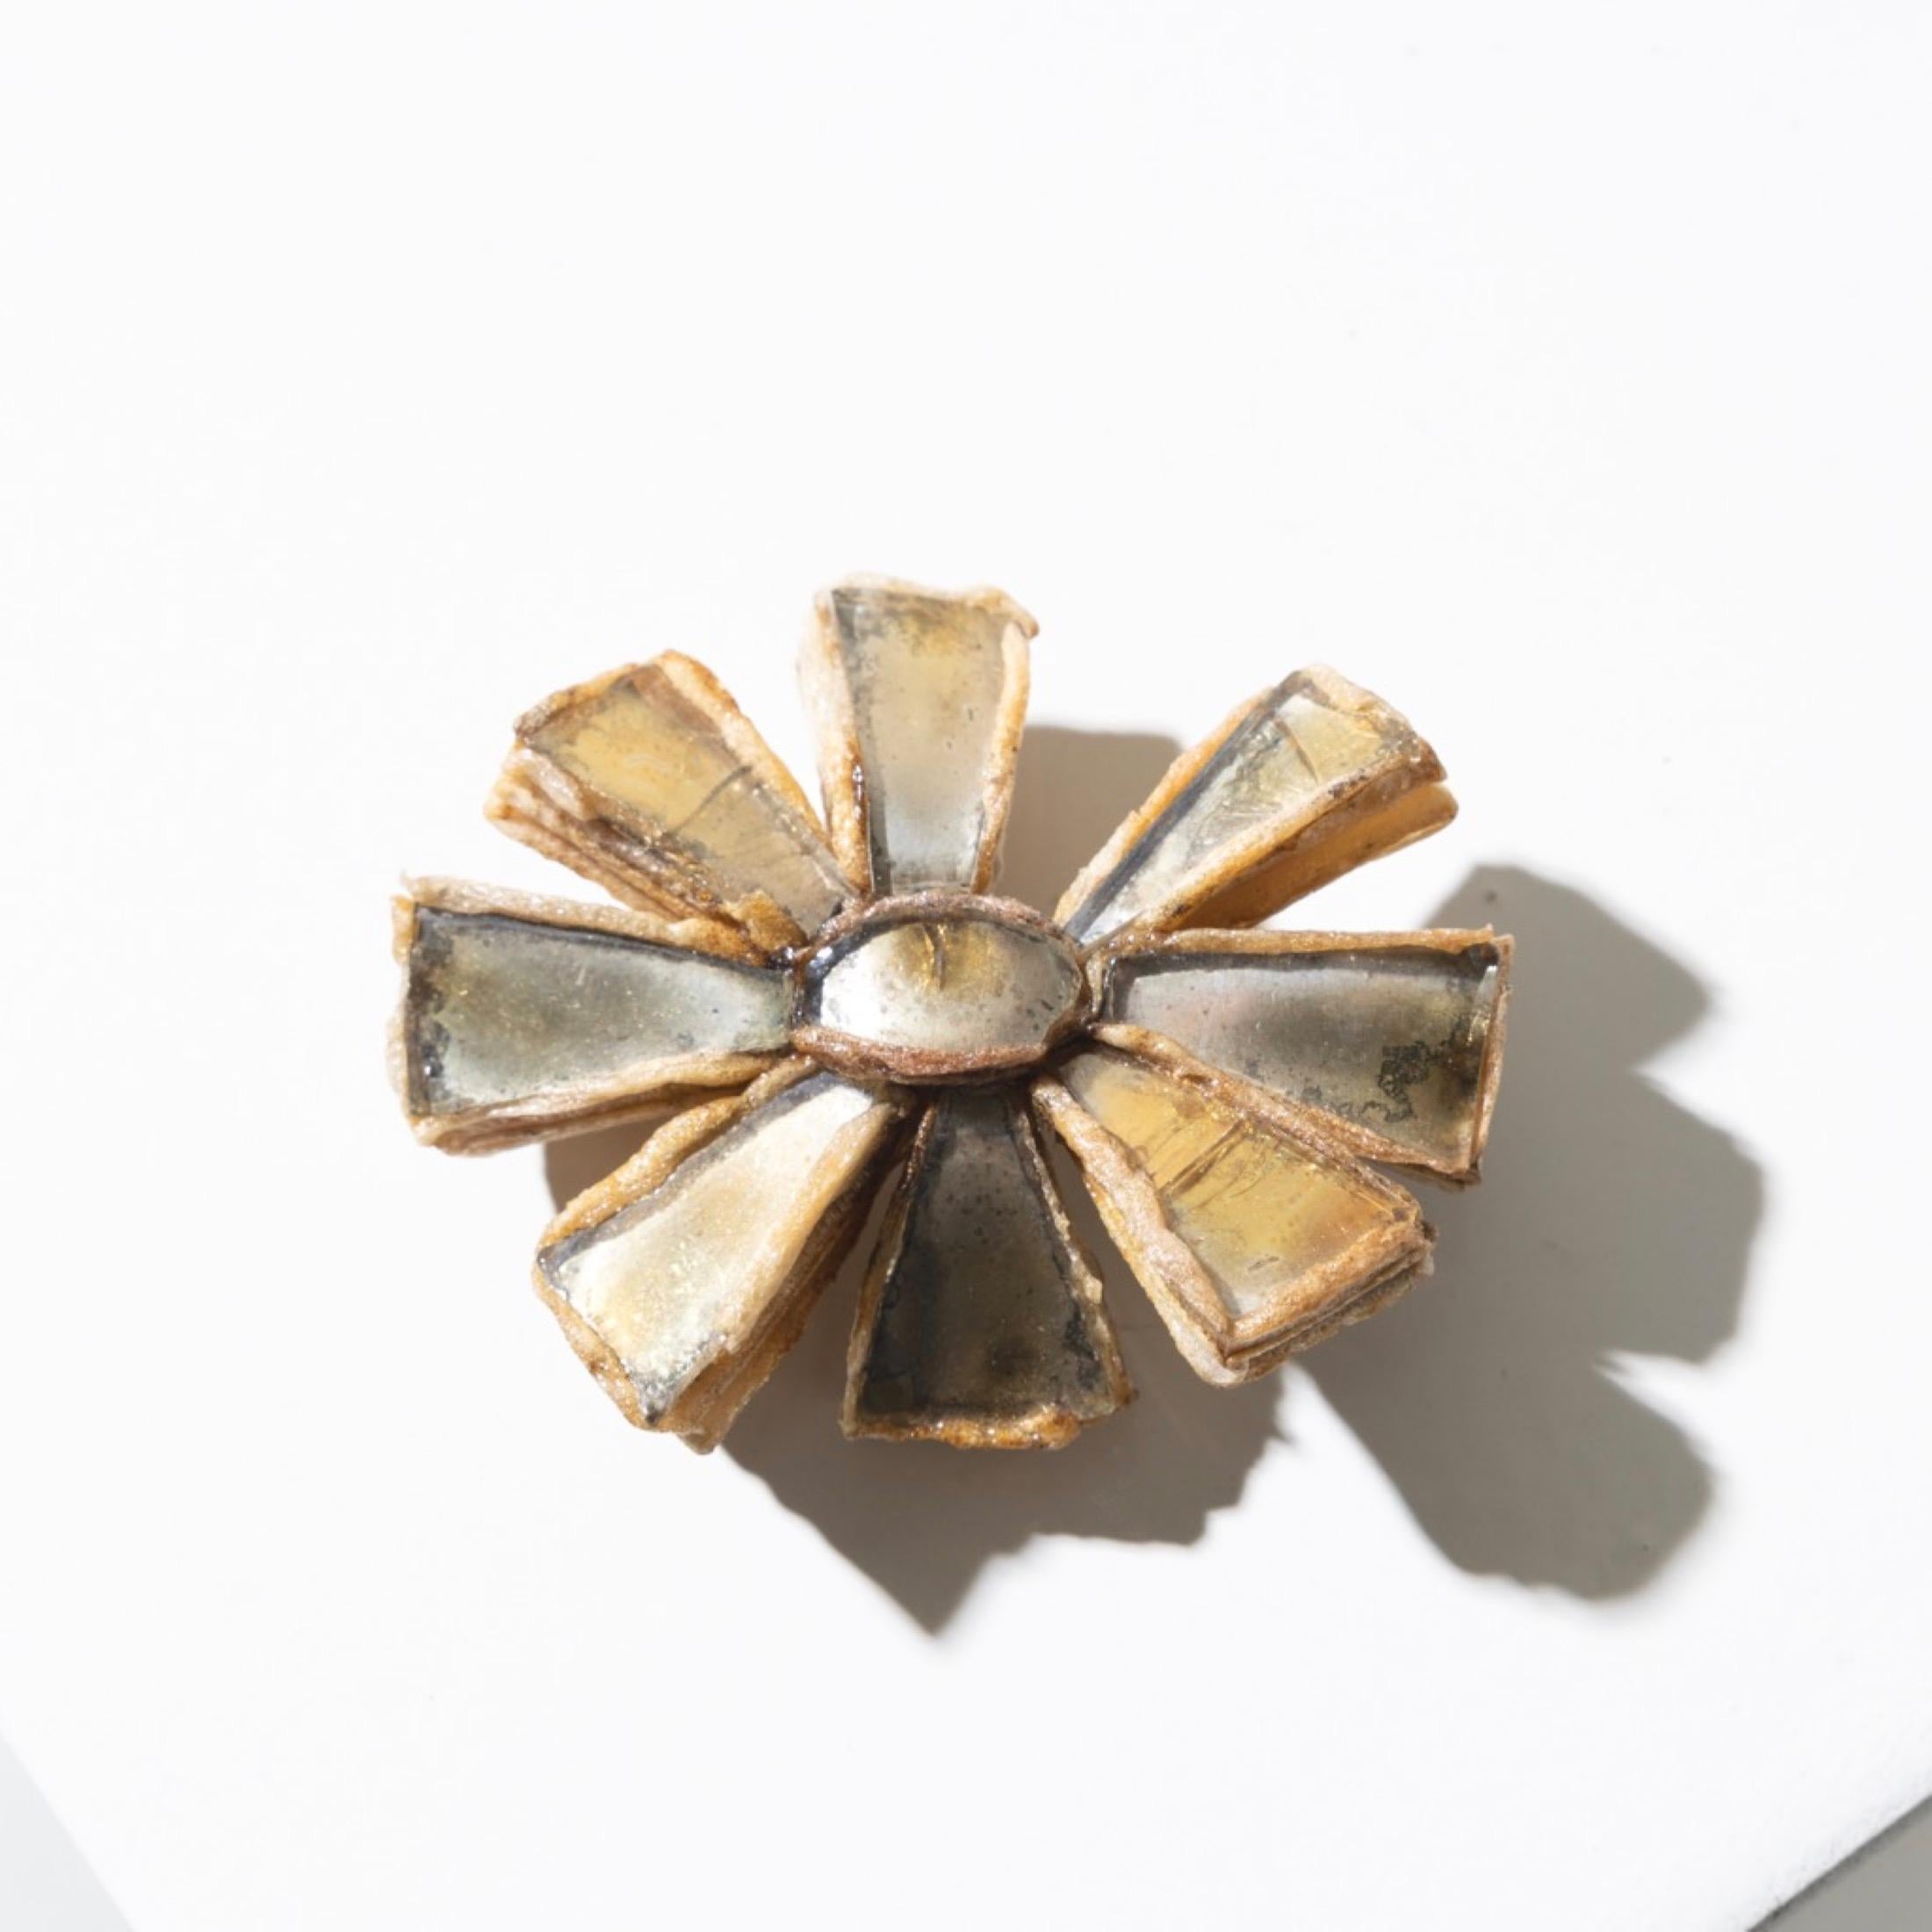 This brooch by Line Vautrin, made of beige Talosel hand-sculpted by scarification, recalls the delicate and elegant shape of a daisy flower. The beauty of this brooch is not only in its shape, but also in the details that compose it. Eight small